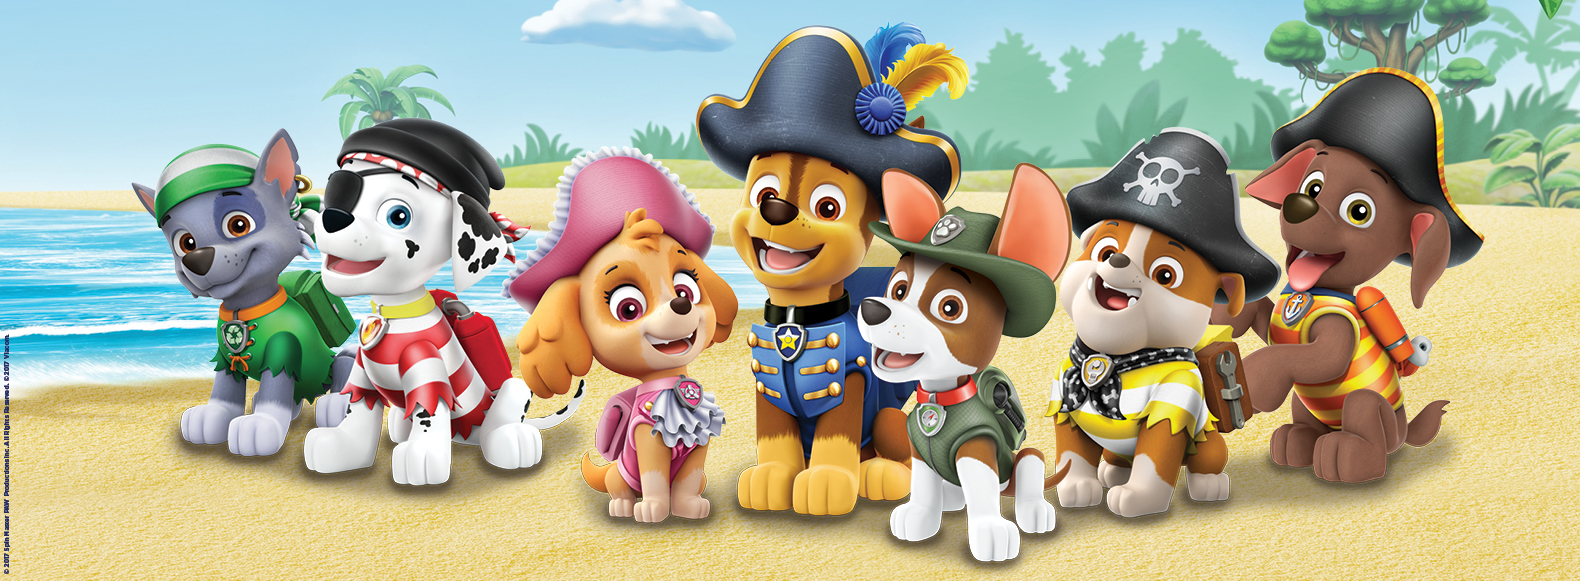 Paw Patrol Pictures Gallery - Paw Patrol Live Pirate , HD Wallpaper & Backgrounds